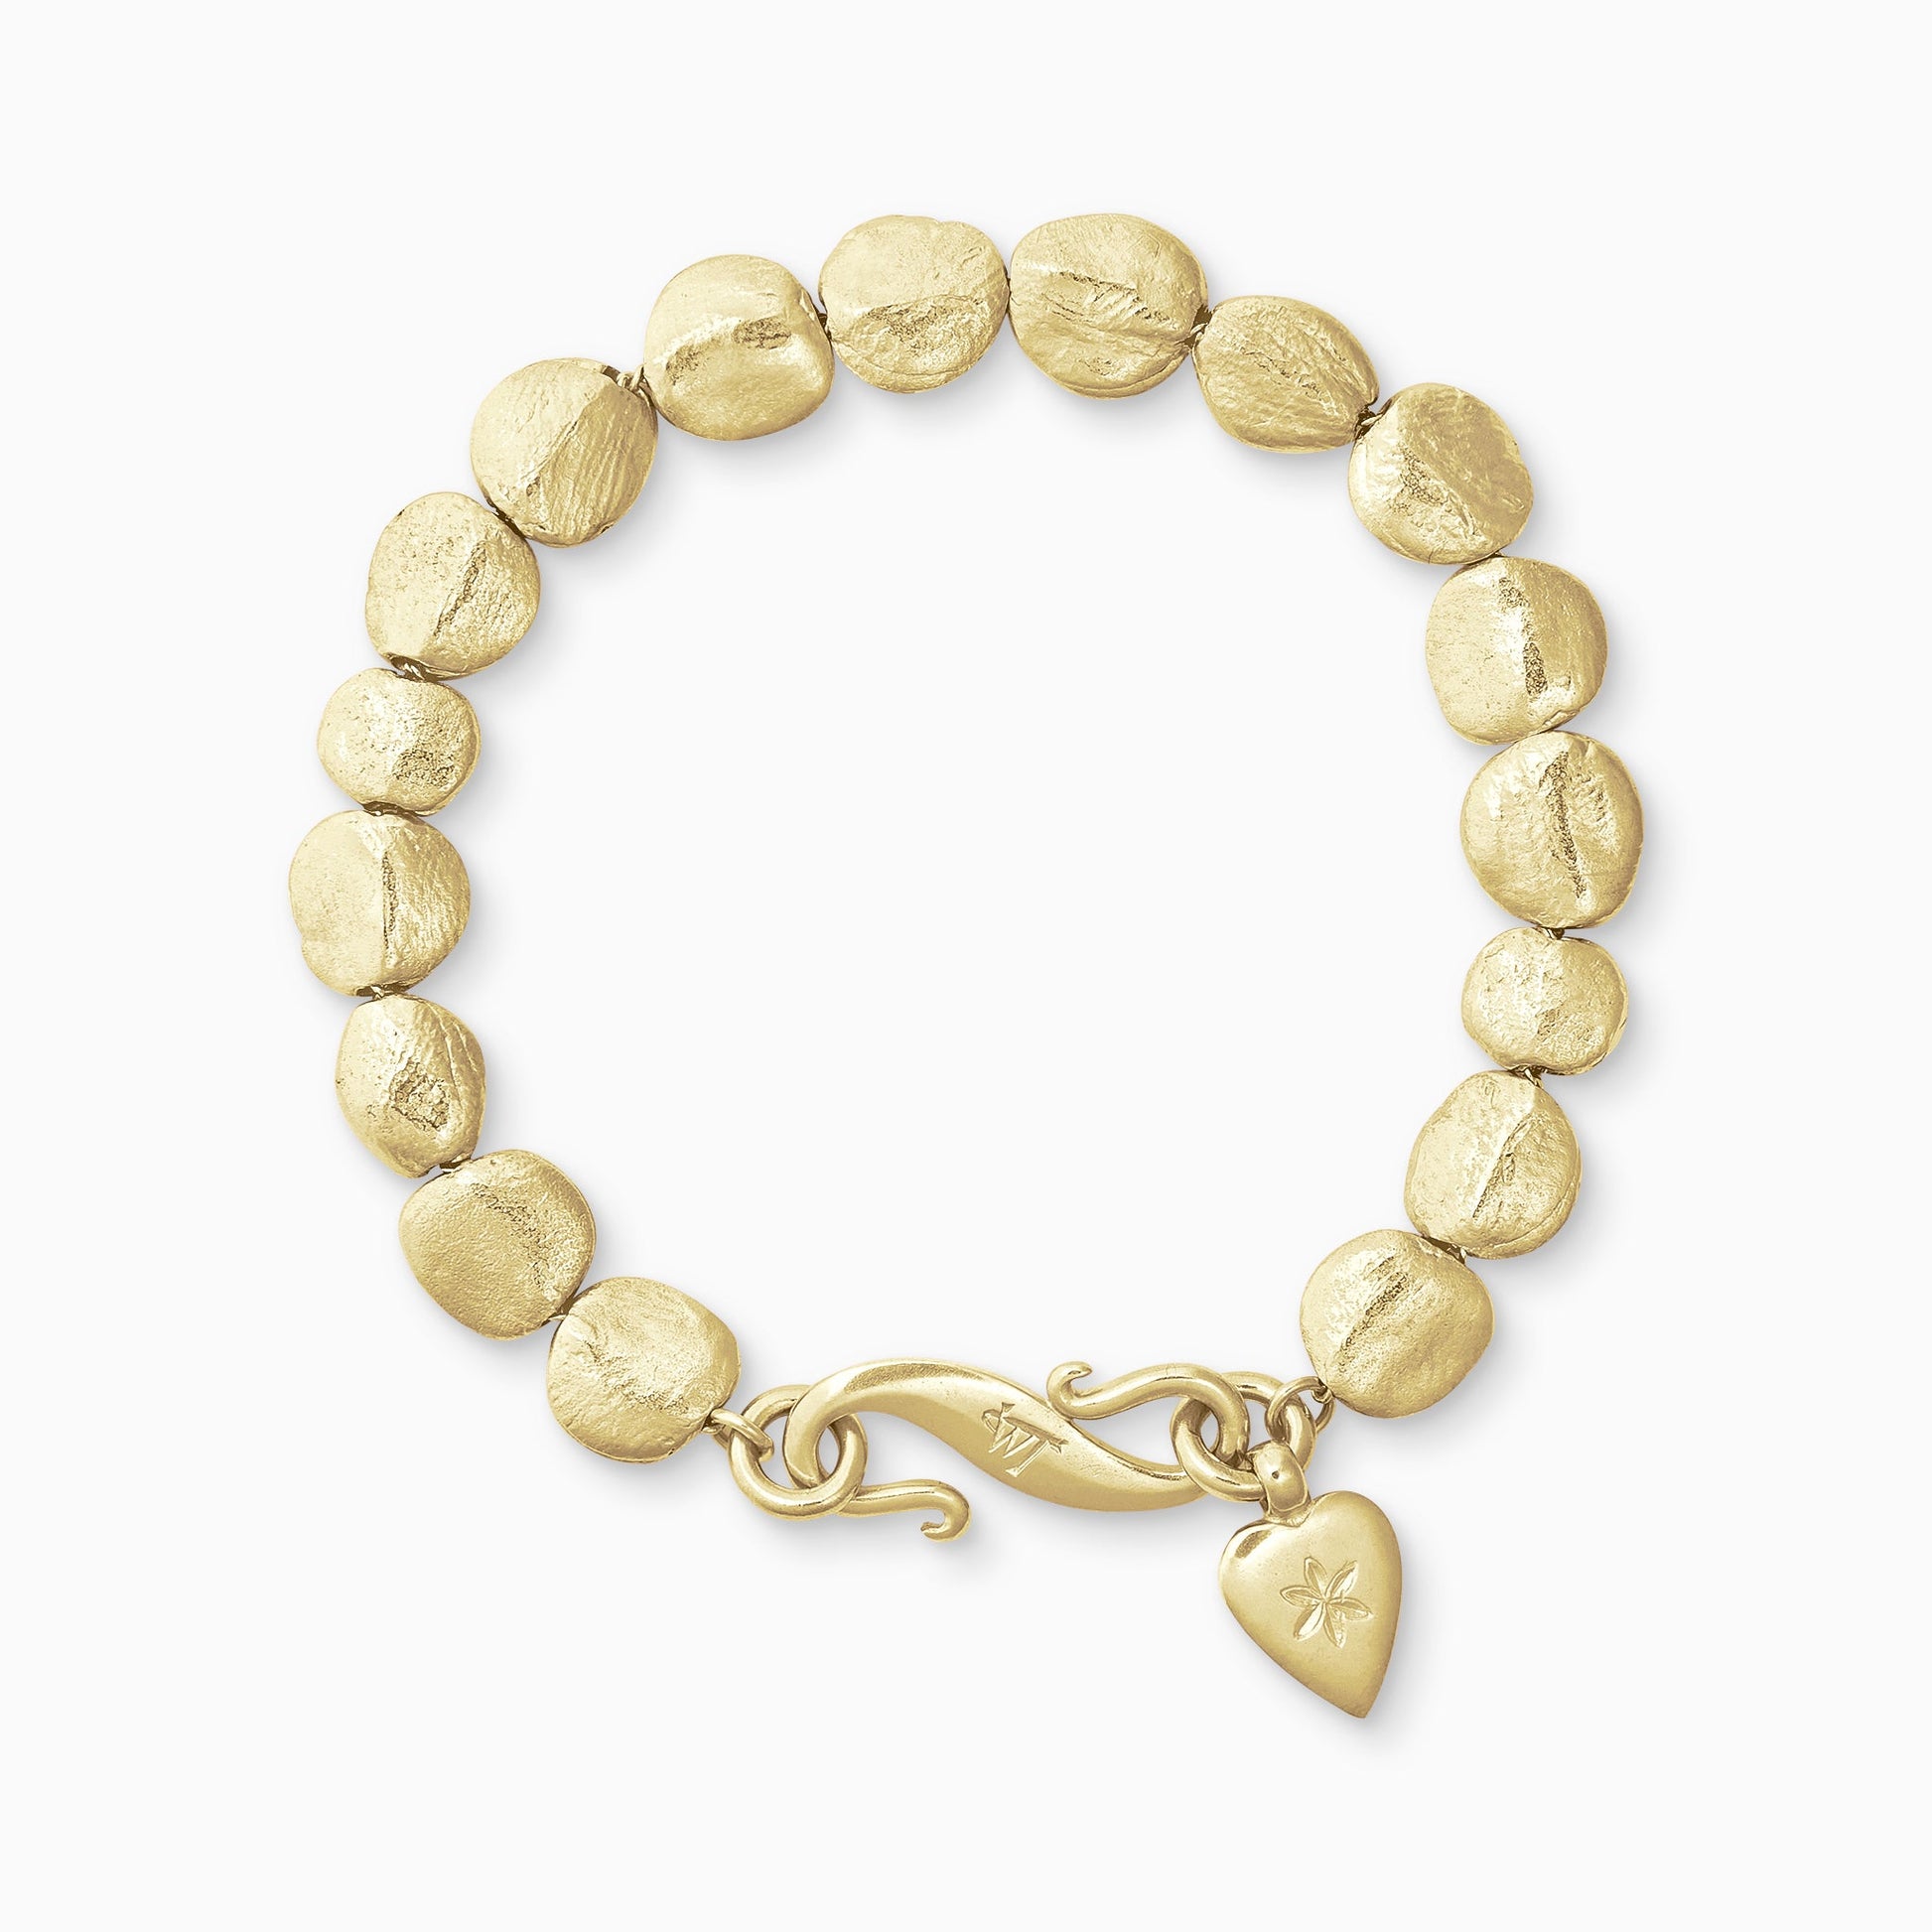 An 18ct Fairtrade yellow gold bracelet of handmade textured beads with a smooth heart shaped charm engraved with a 6 petal flower and our signature ’S’ clasp. Bracelet length 210mm. Beads varying from approximately 7mm x 4mm to 10mm x 11mm